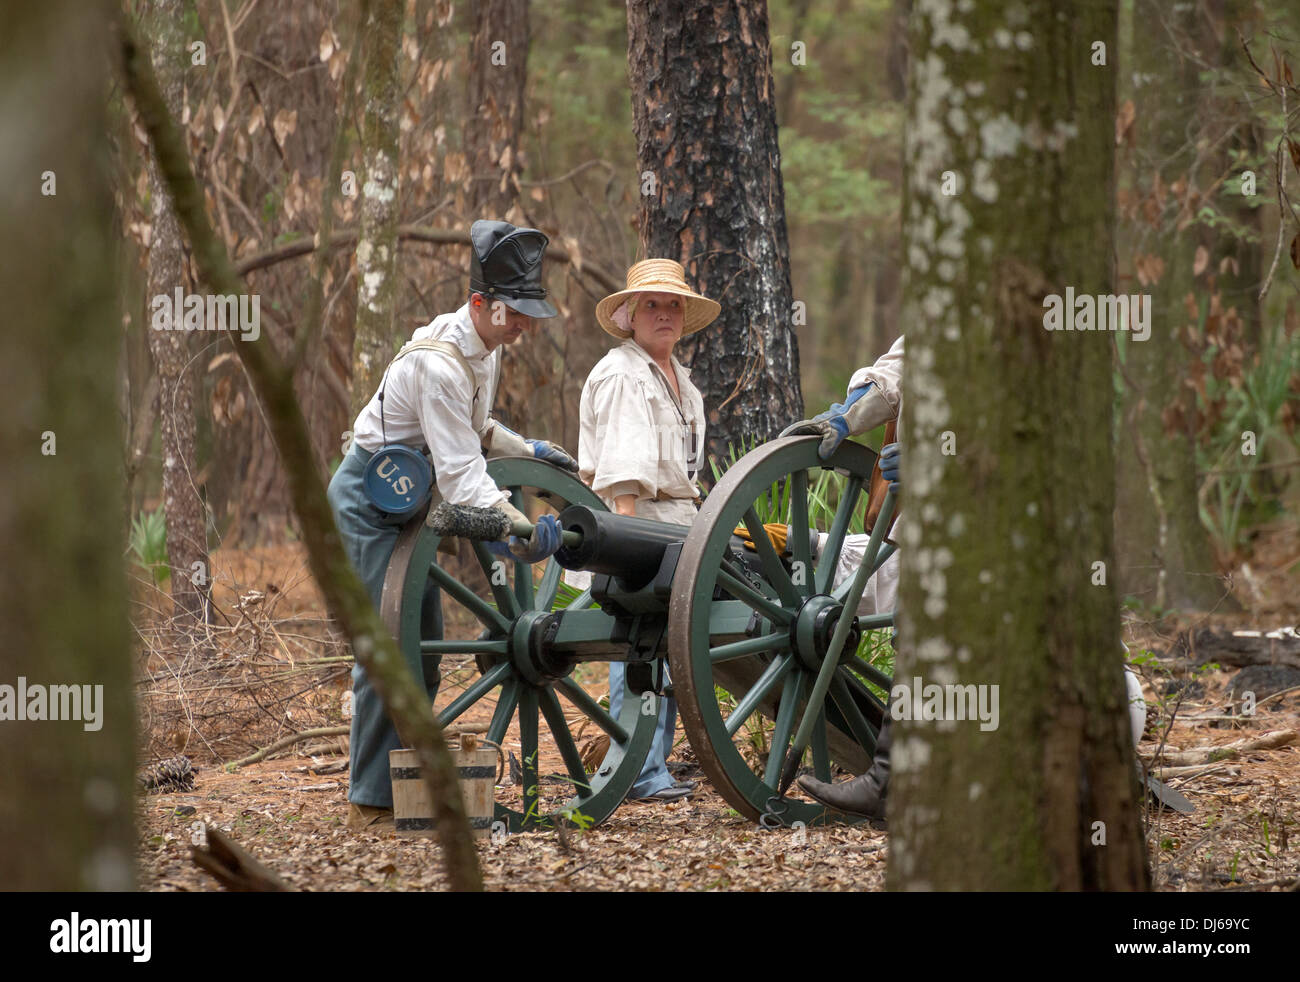 US soldiers recreating the 2nd Seminole War during Native American Festival at Oleno State Park in North Florida. Stock Photo